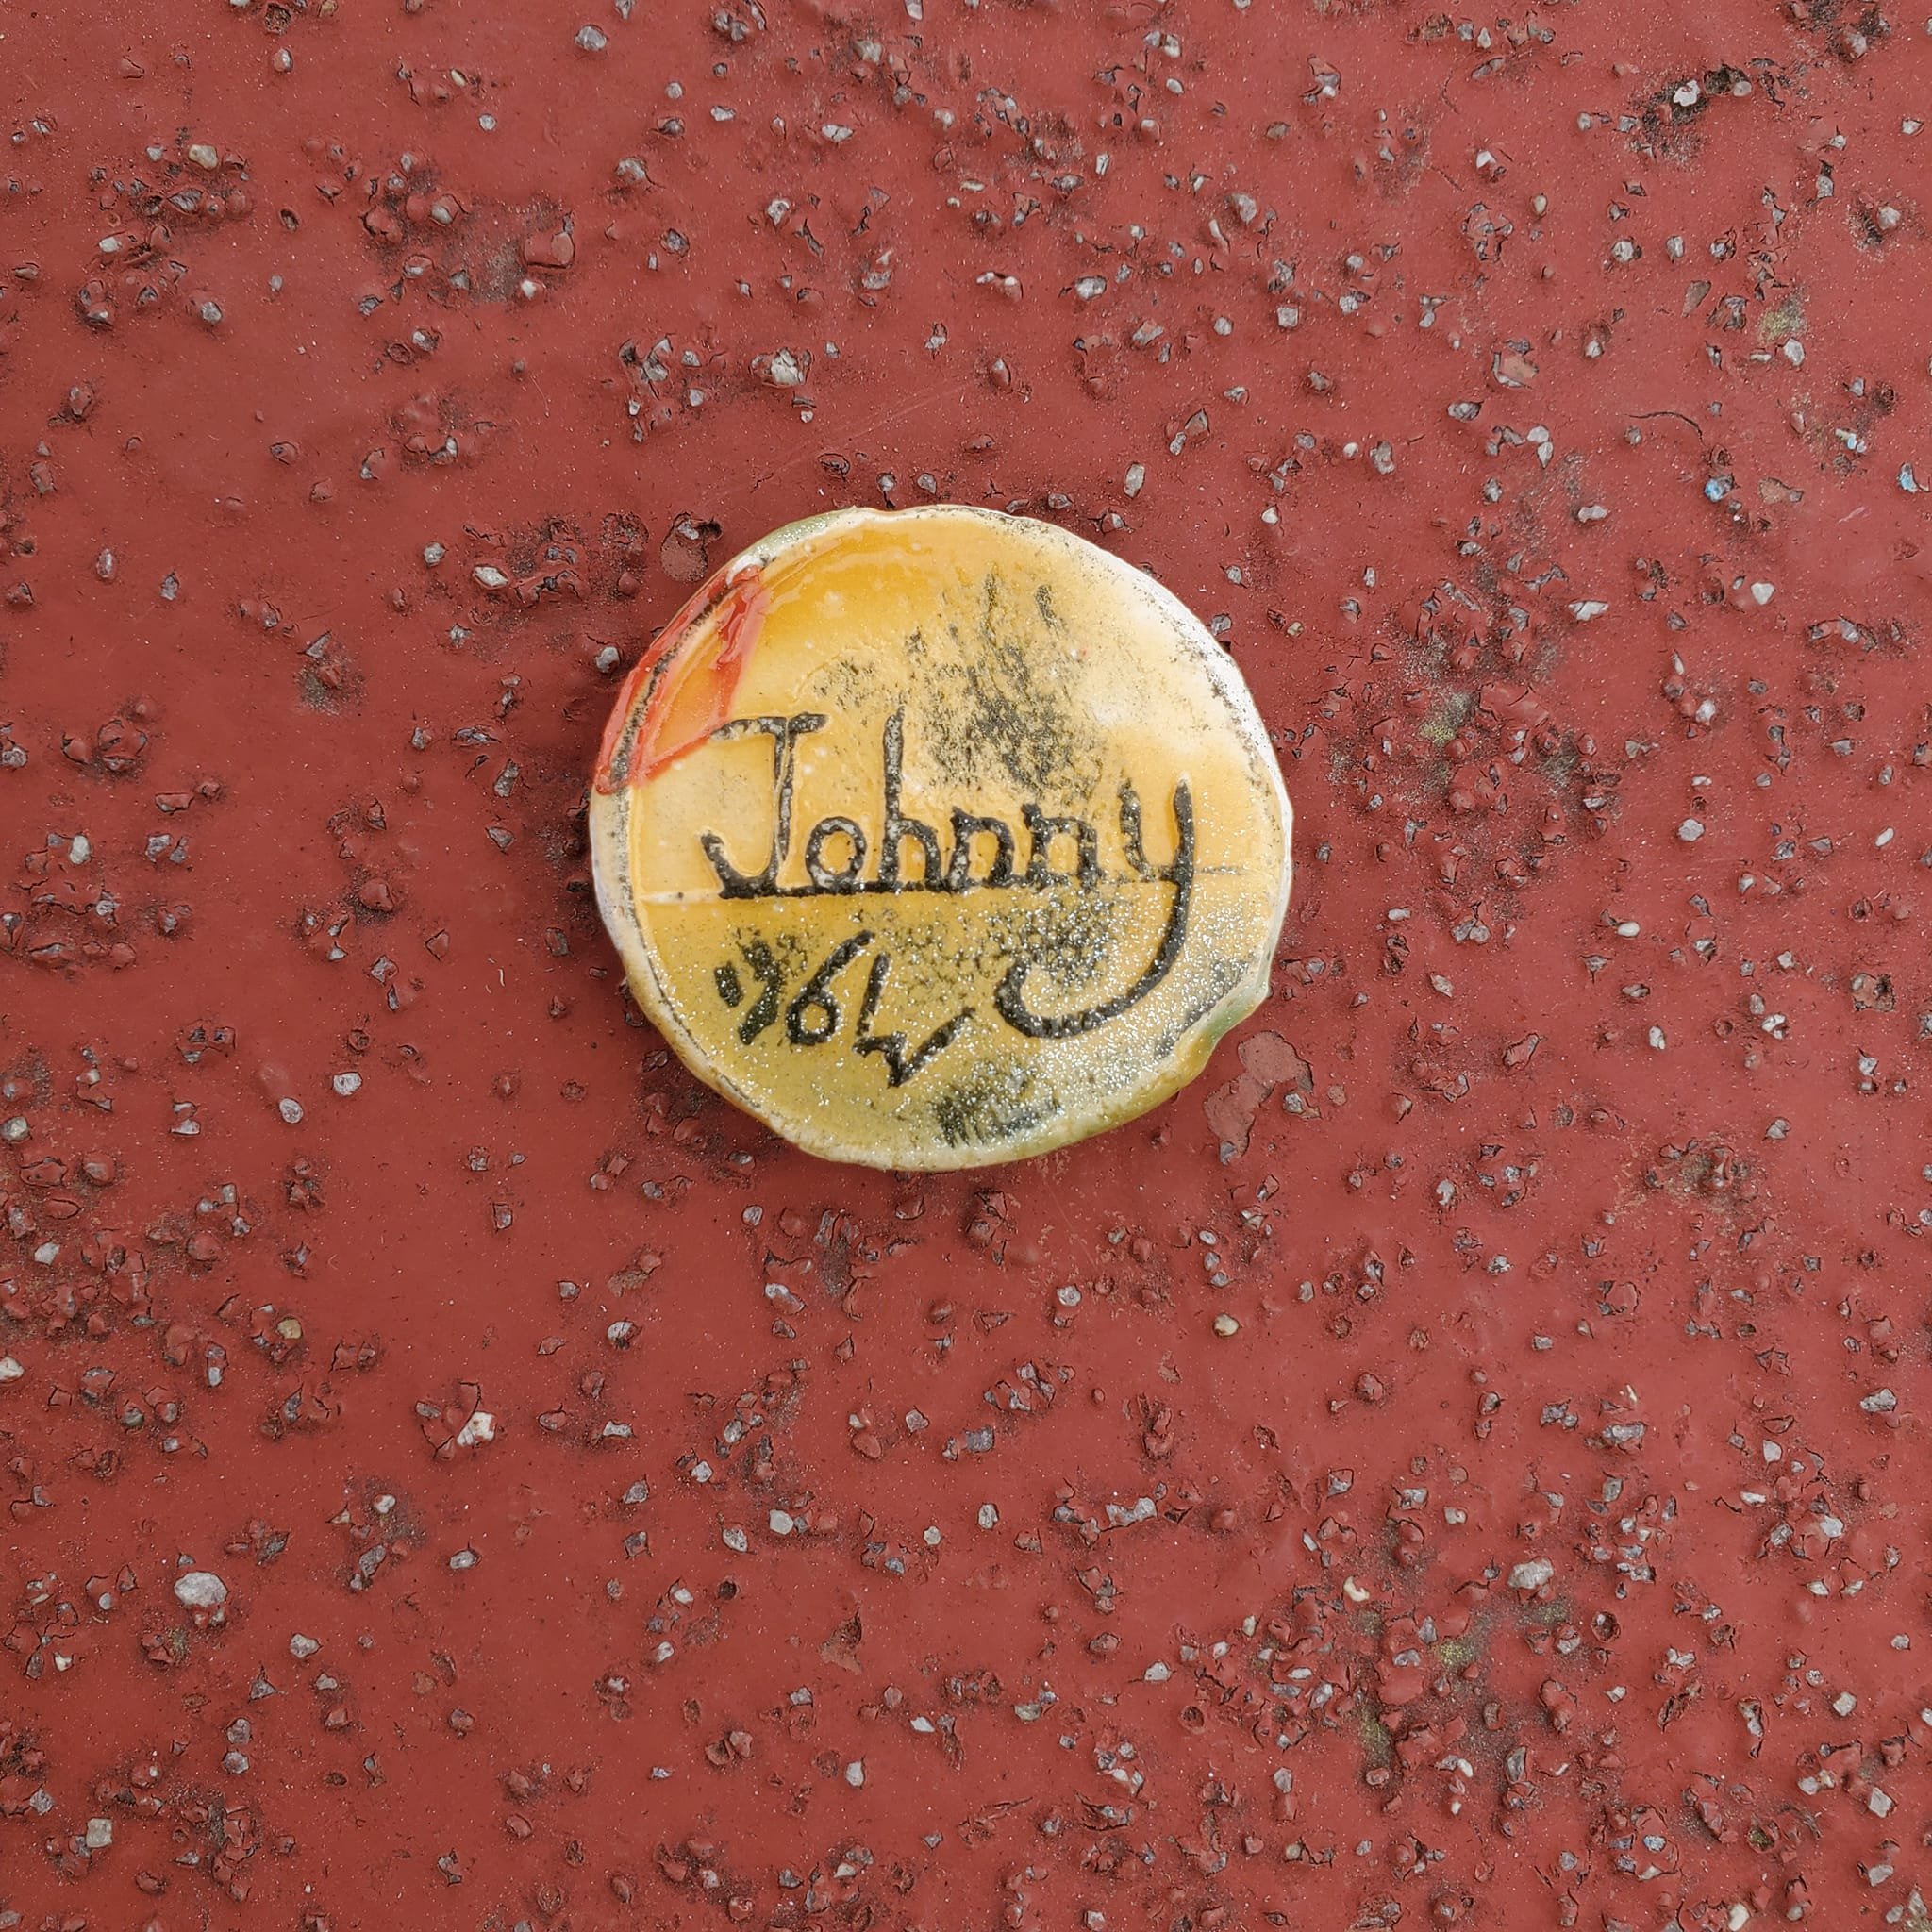 Happy day! We heard that Beriah Wall was back in the Hook, and we were blessed with one of his gifts! 😍  We found one of his art coins on the deck of the #MaryWhalen. 'tis a visitation from a kind and creative soul.  This edition is Johnny Appleseed